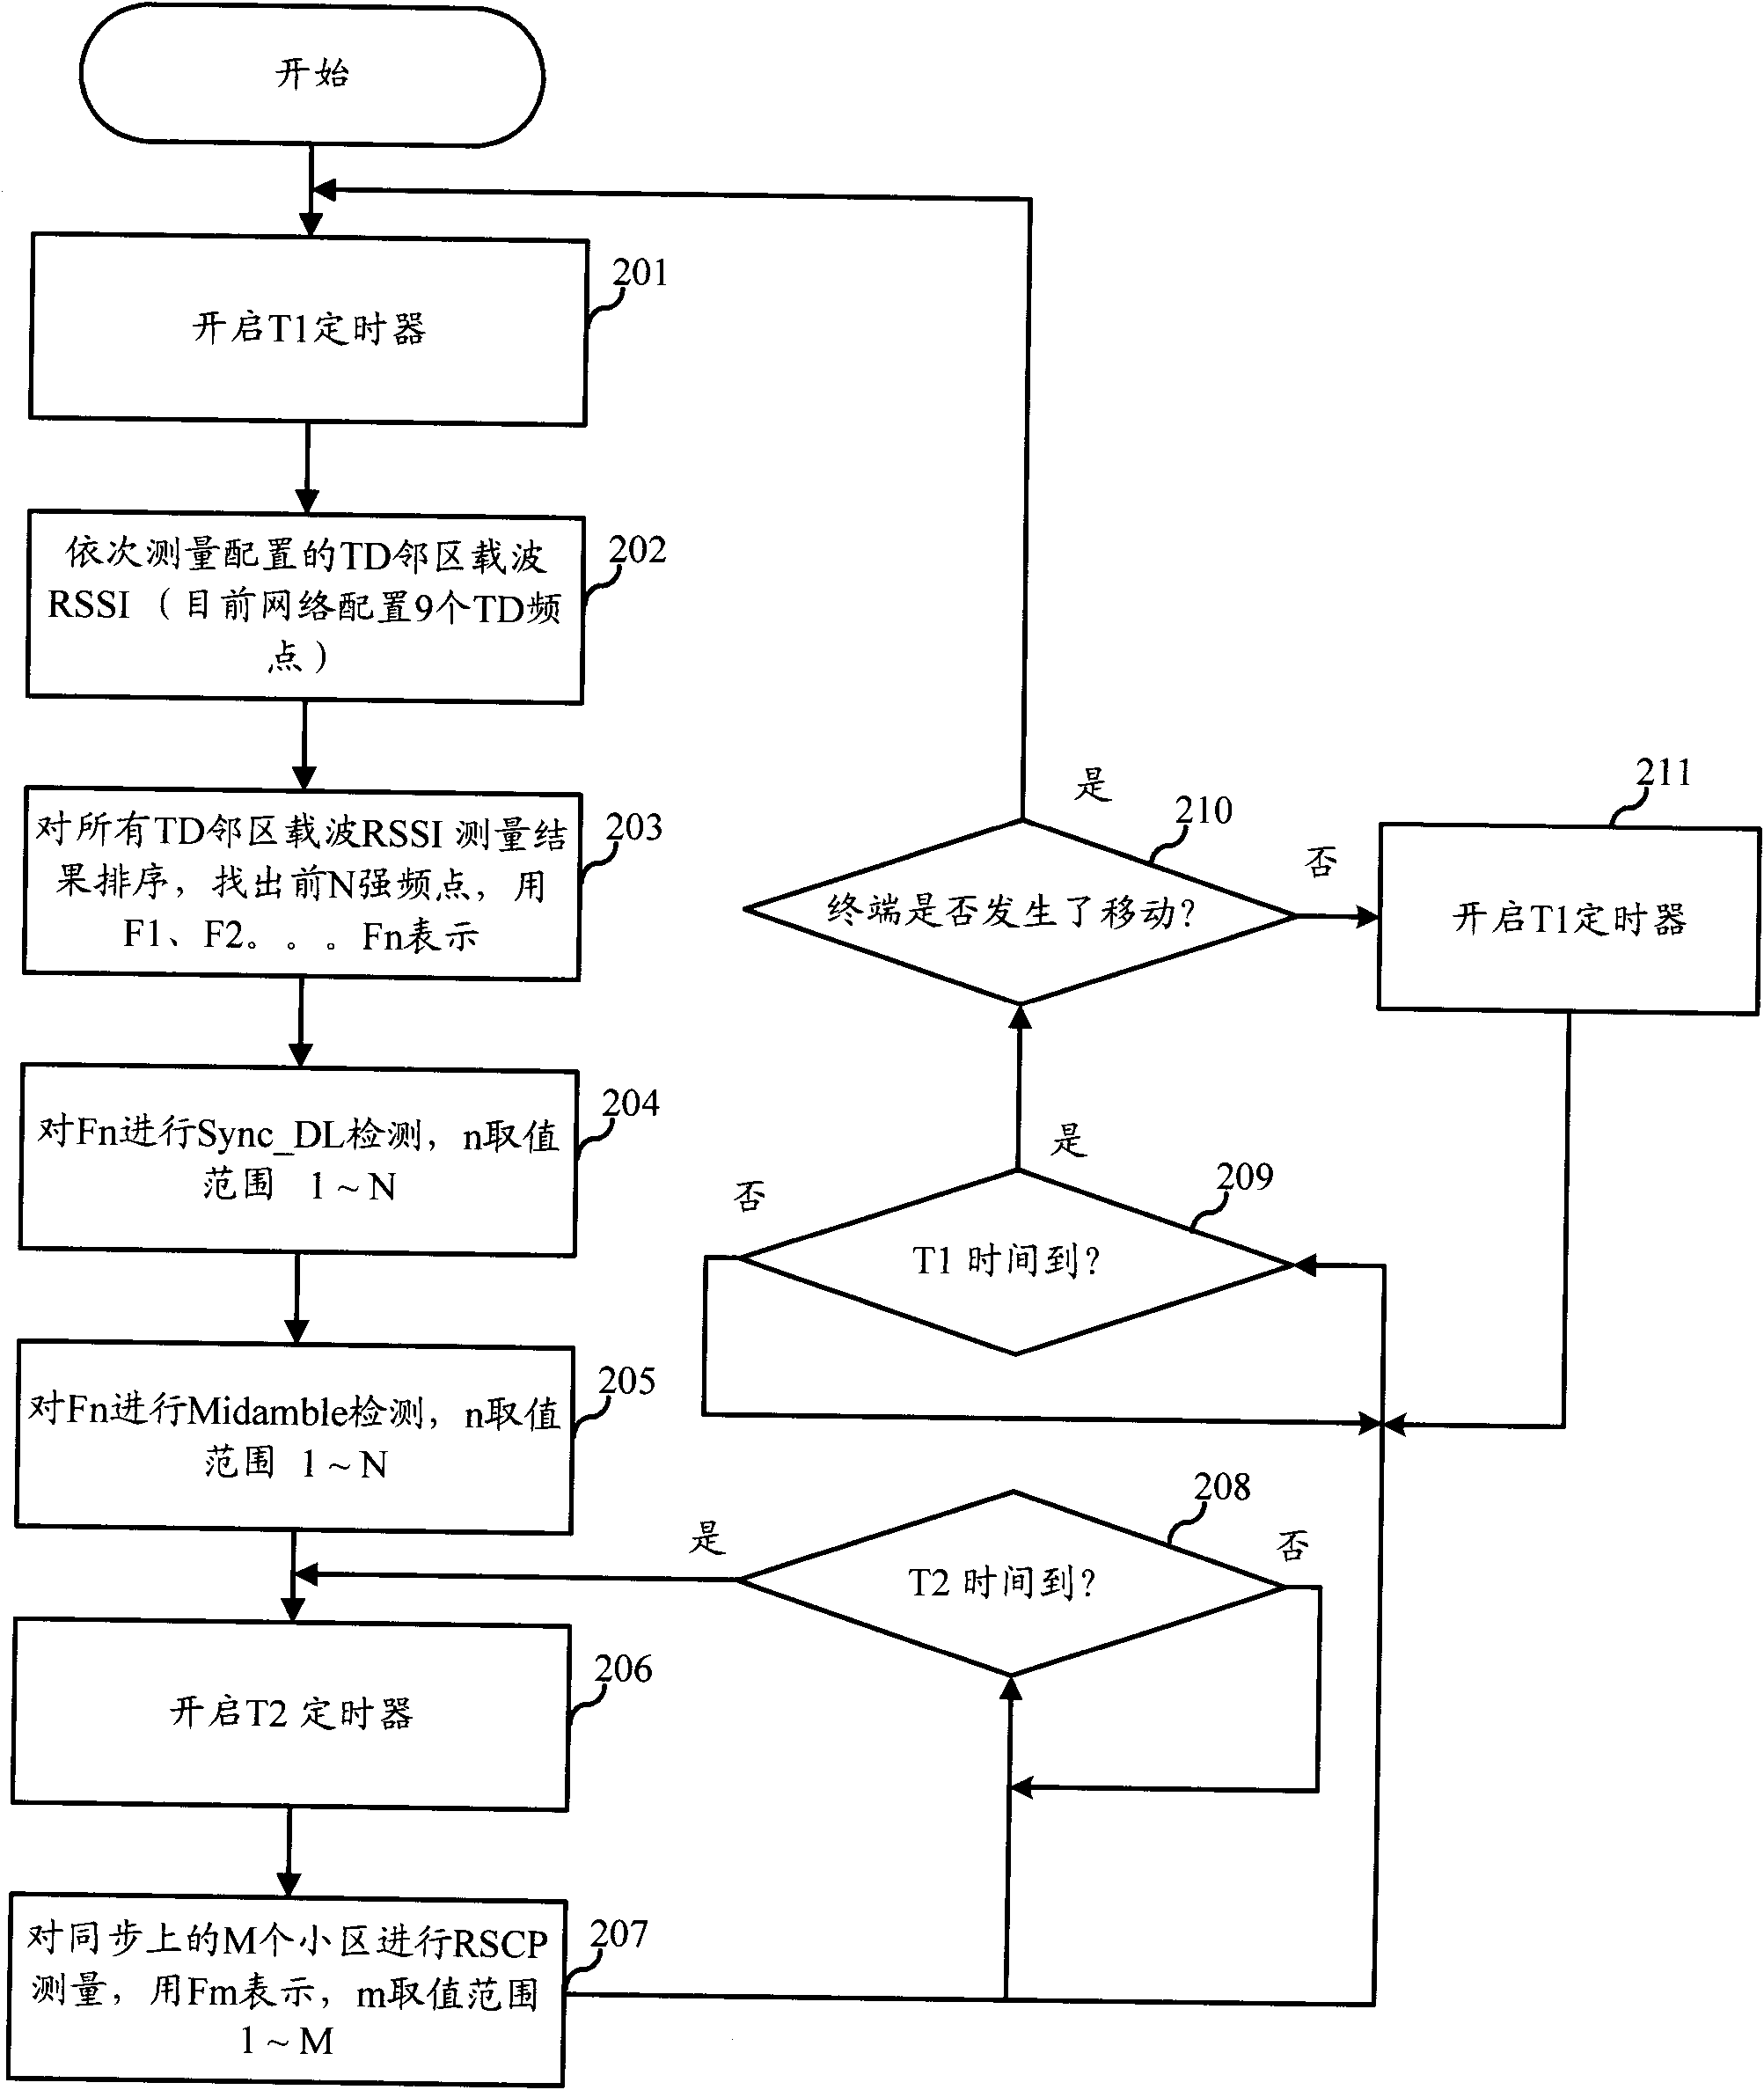 Method for measuring TD-SCDMA (Time Division-Synchronization Code Division Multiple Access) cell in GSM (Global System for Mobile Communication) mode and dual-mode terminal